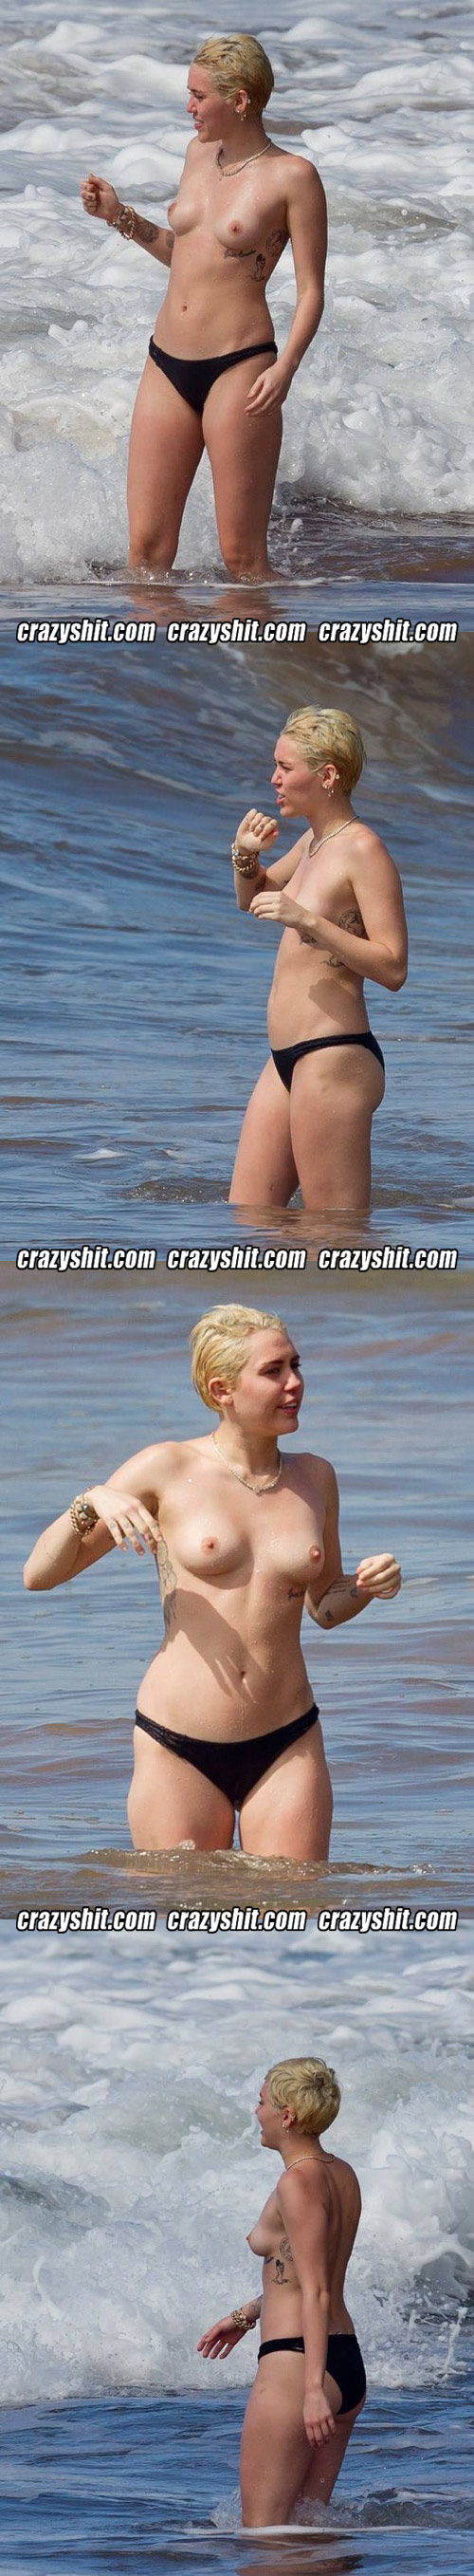 Miley Cyrus Showing Off Her Tits